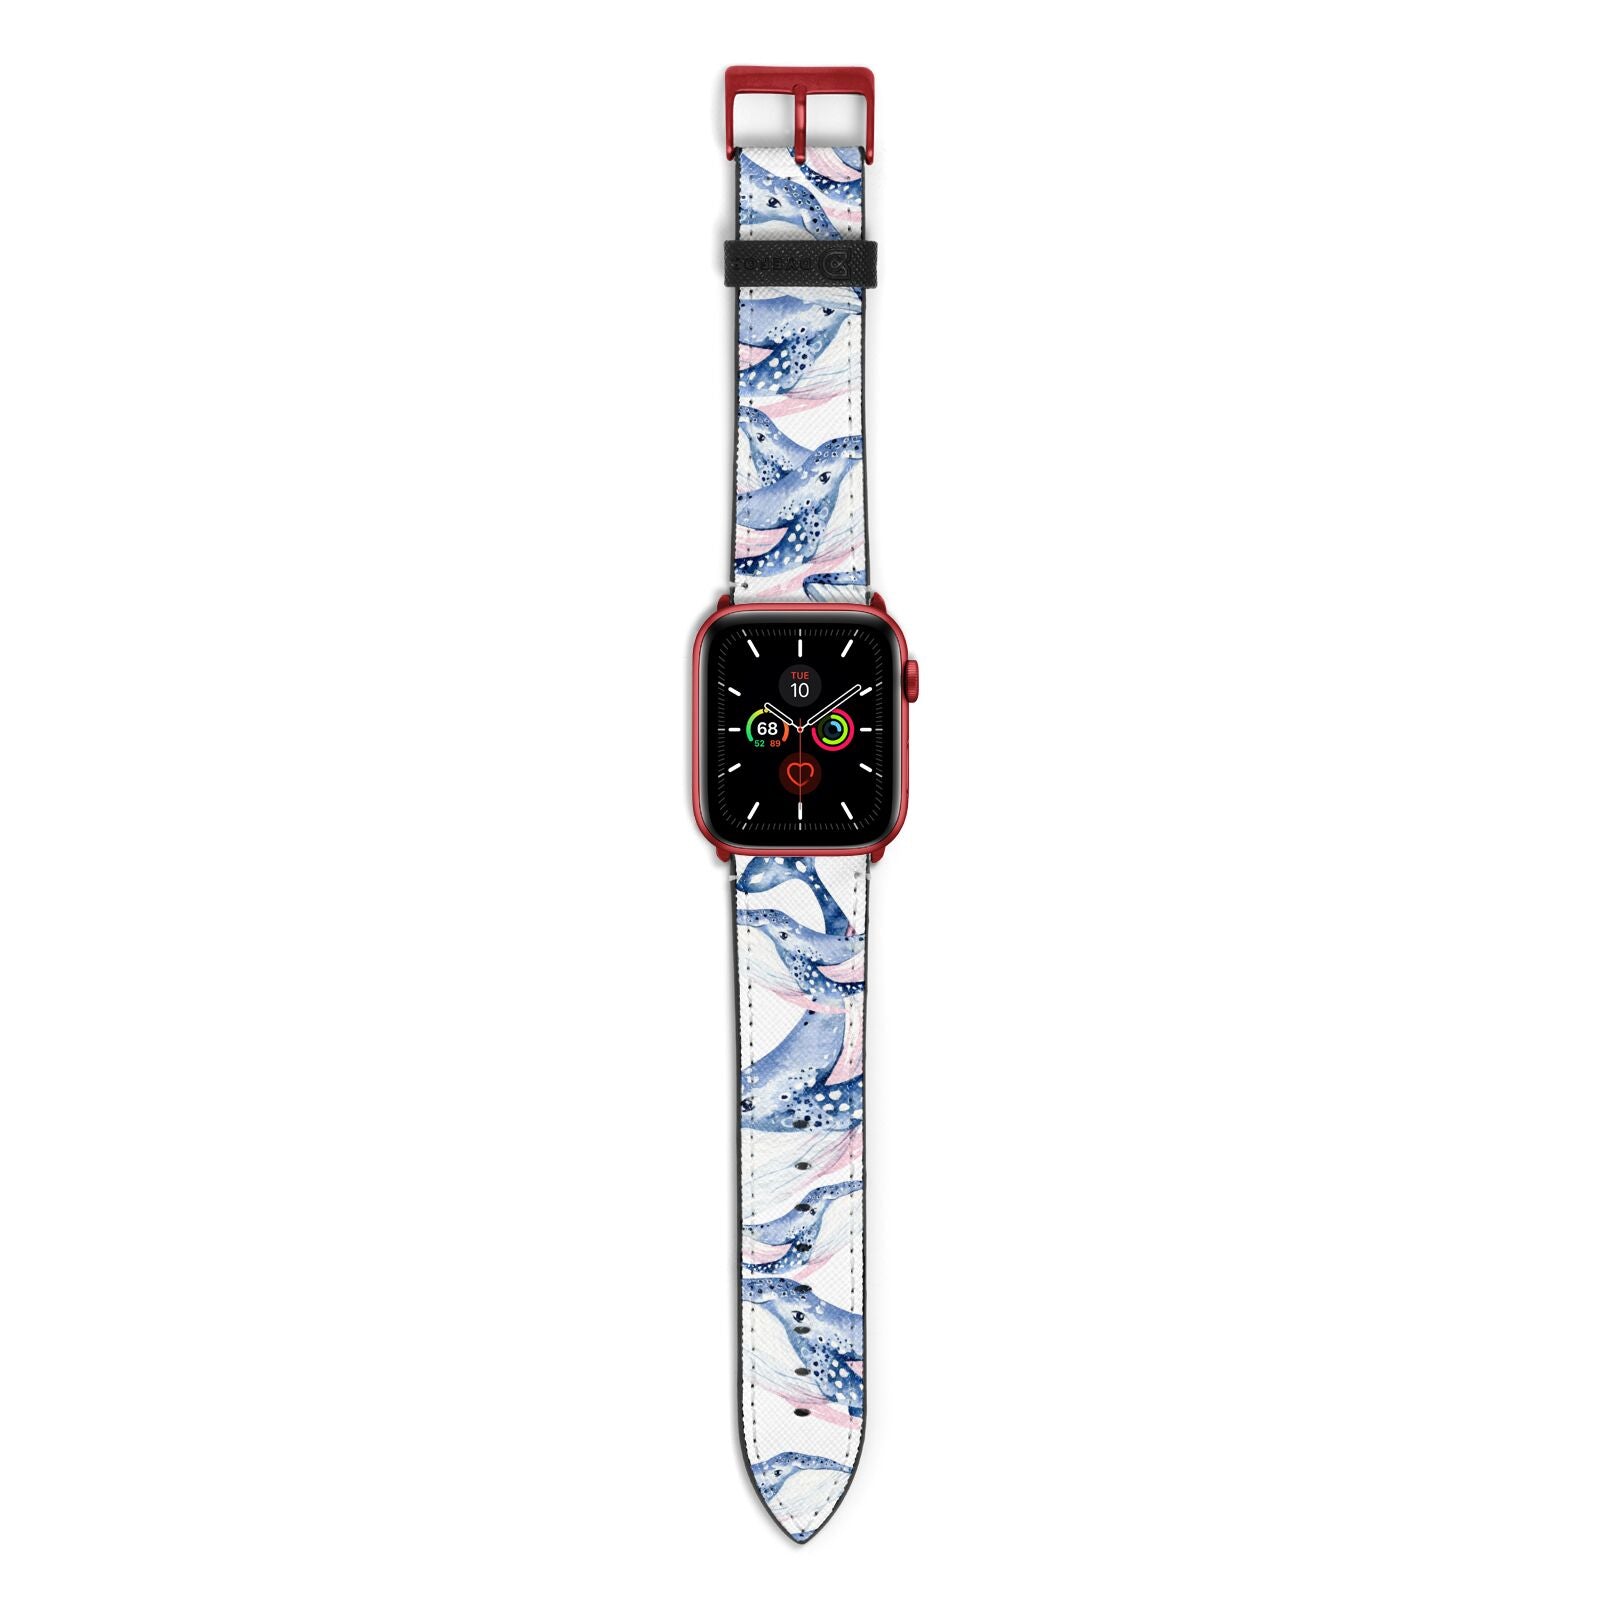 Whale Apple Watch Strap with Red Hardware